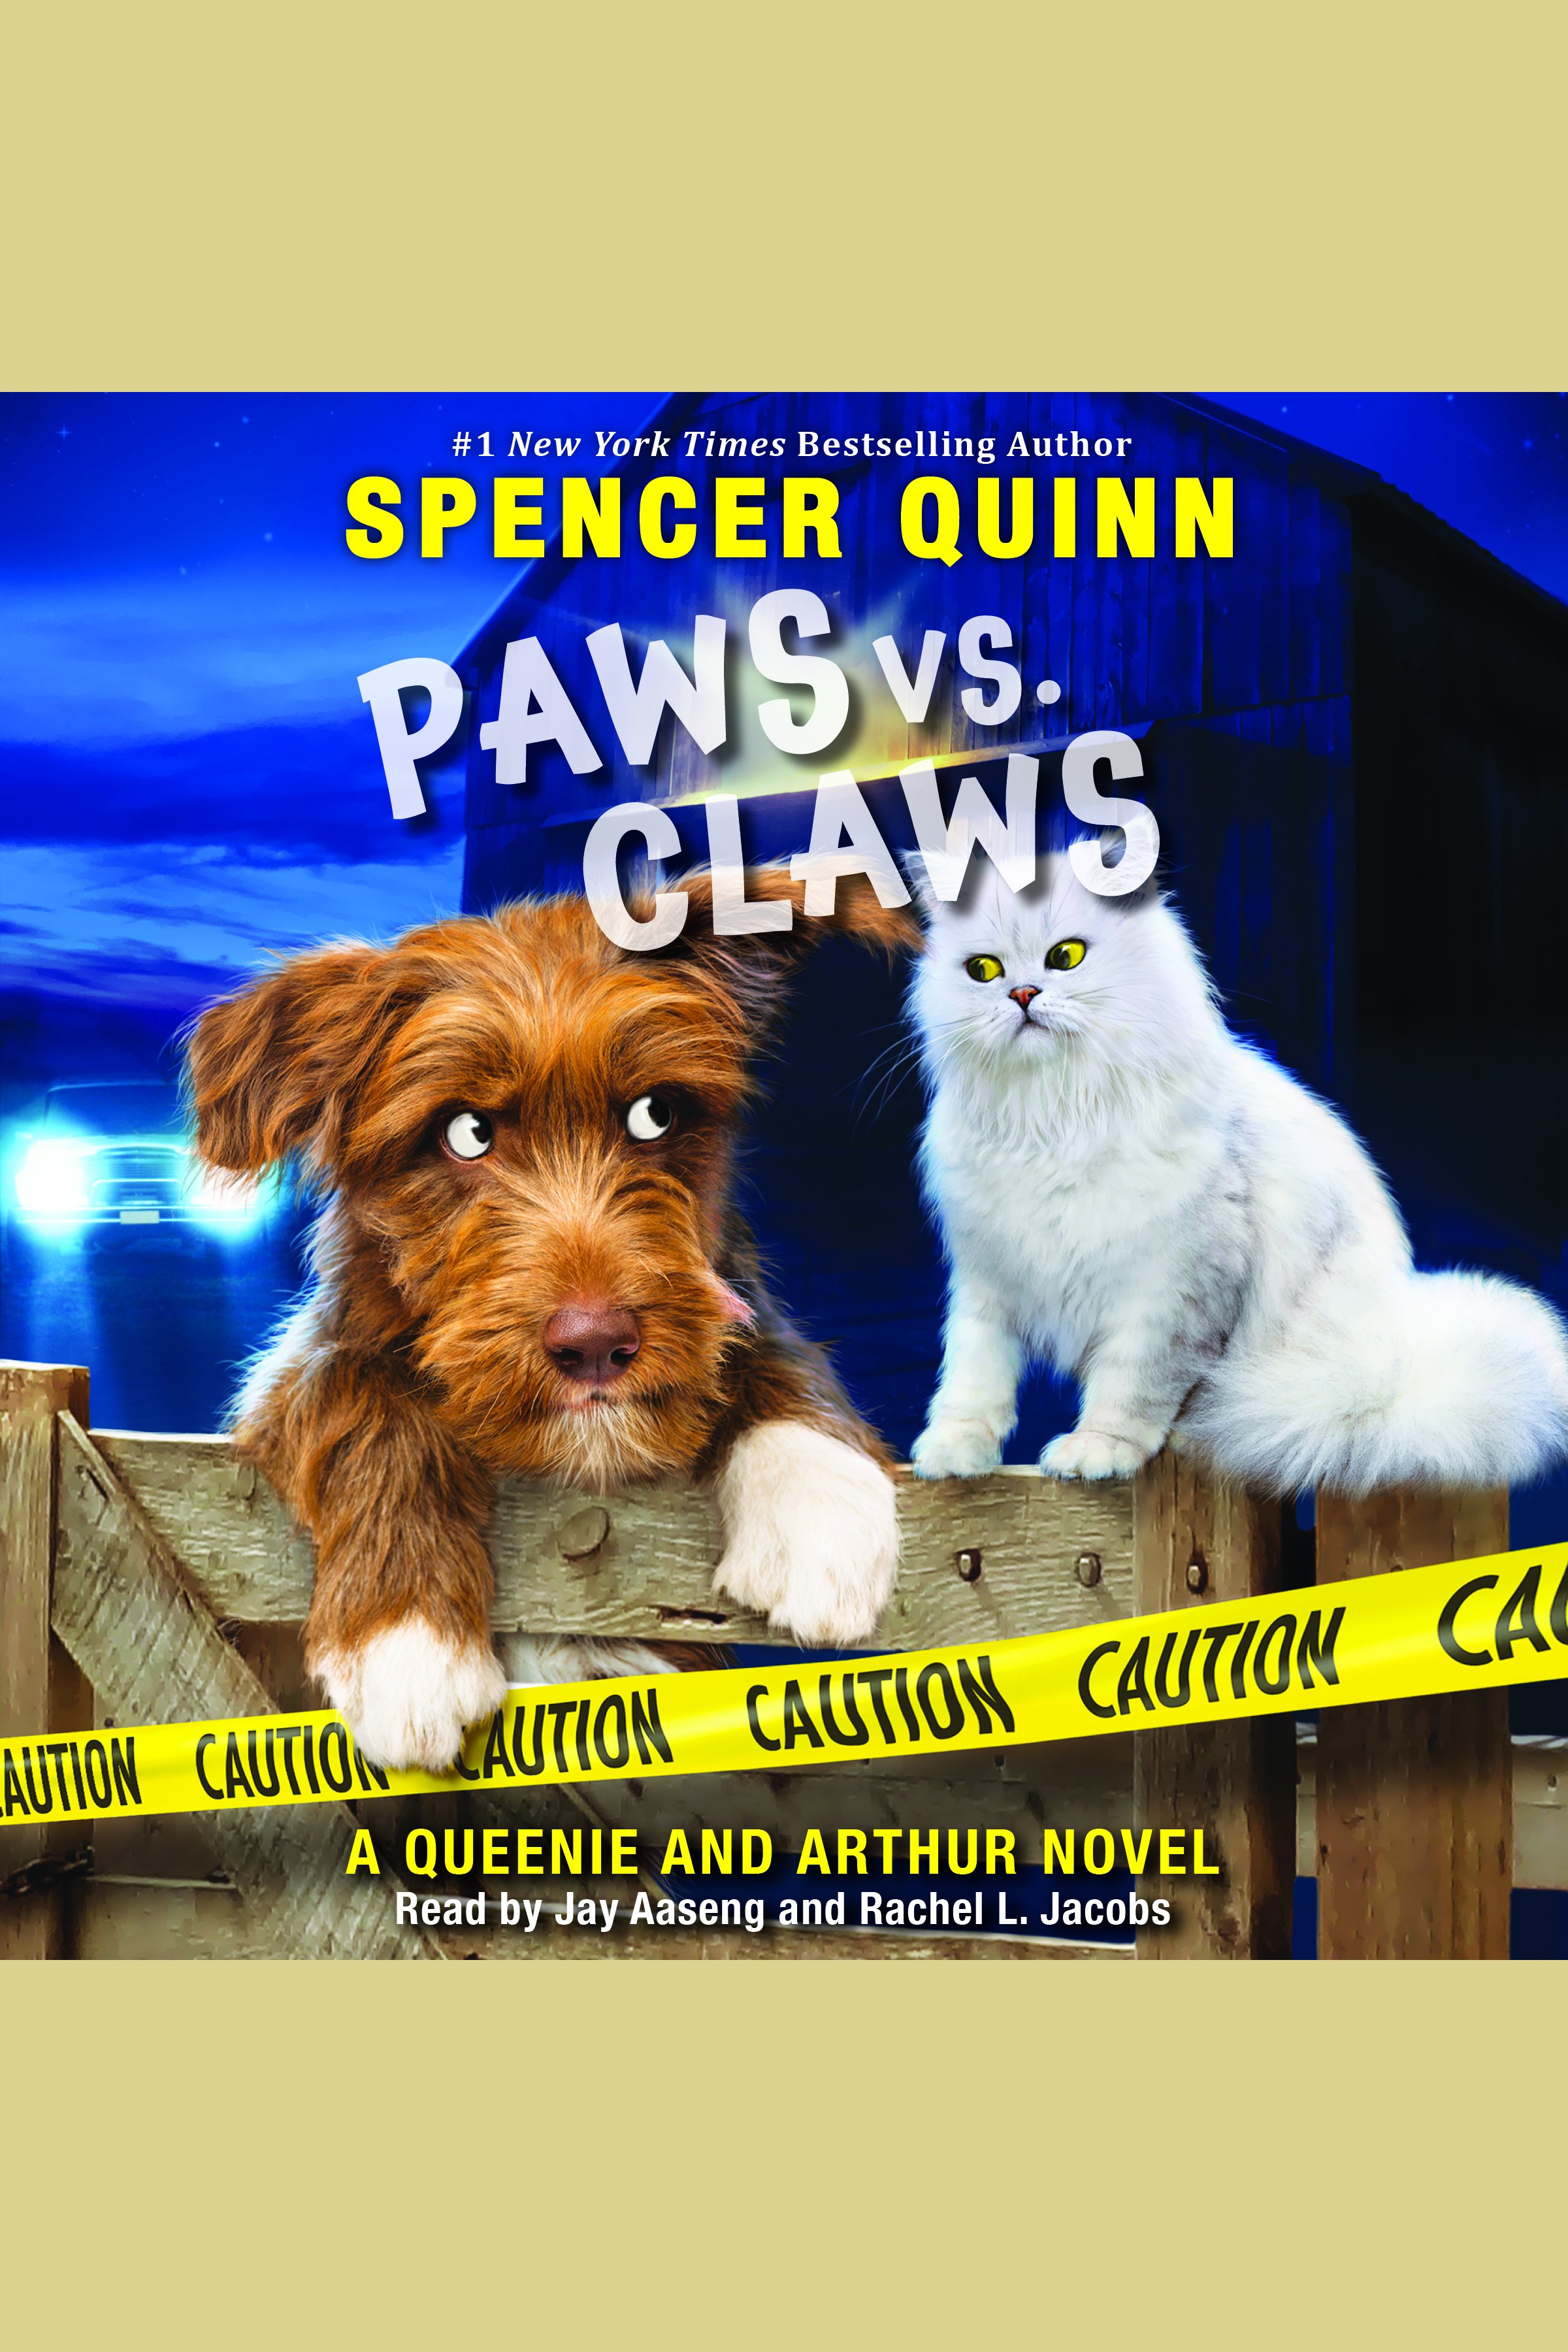 Paws vs. claws cover image